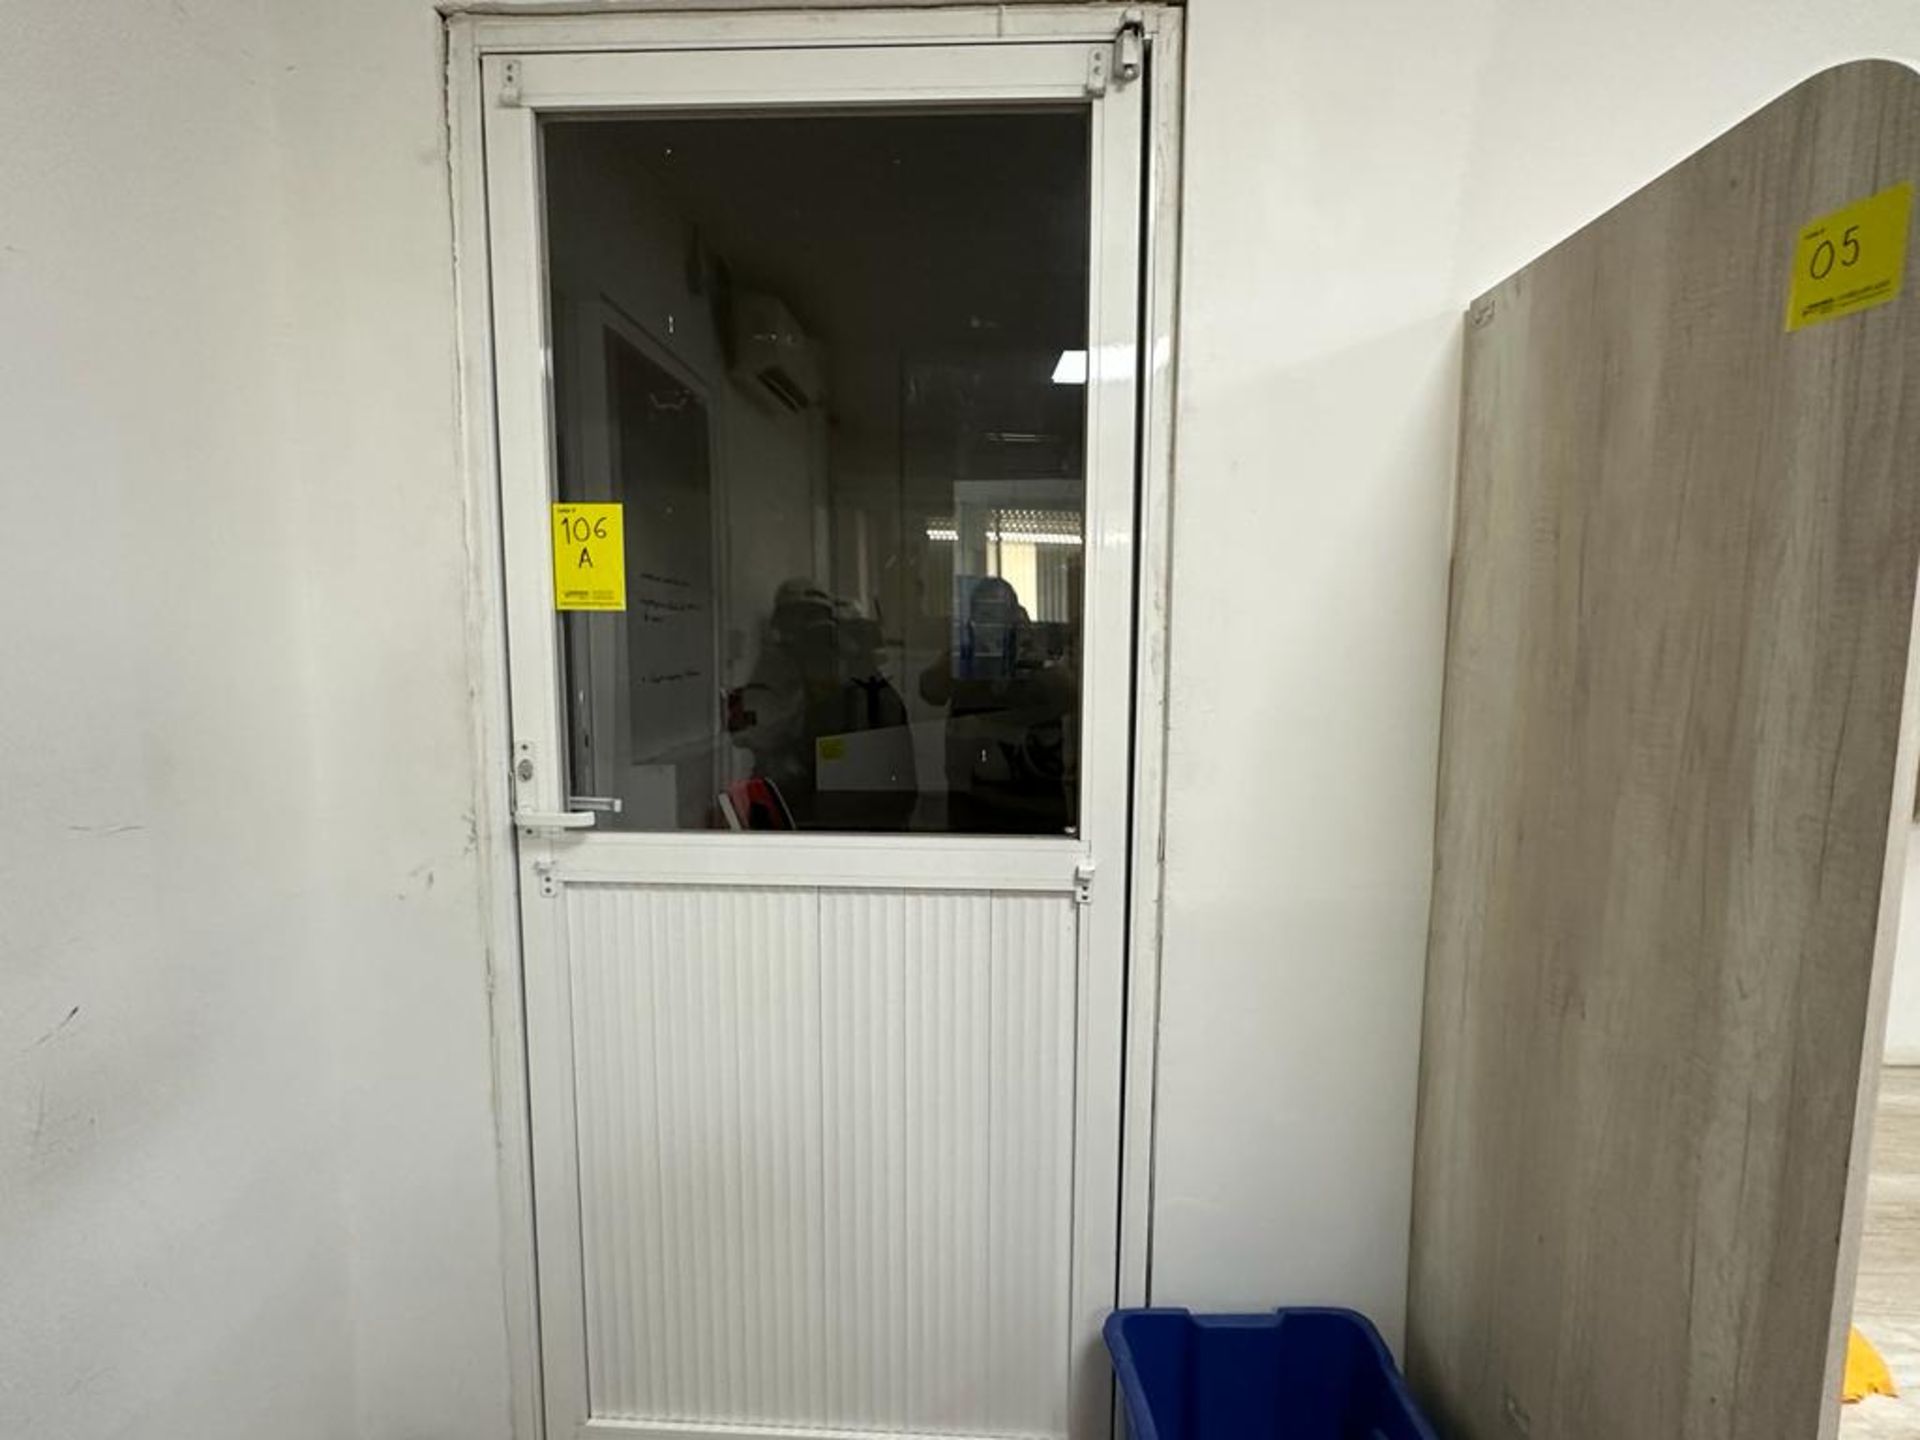 Lot consists of: 1 aluminum window with glass measures approximately 1.47 x 1.10 m; 1 aluminum - Image 5 of 8